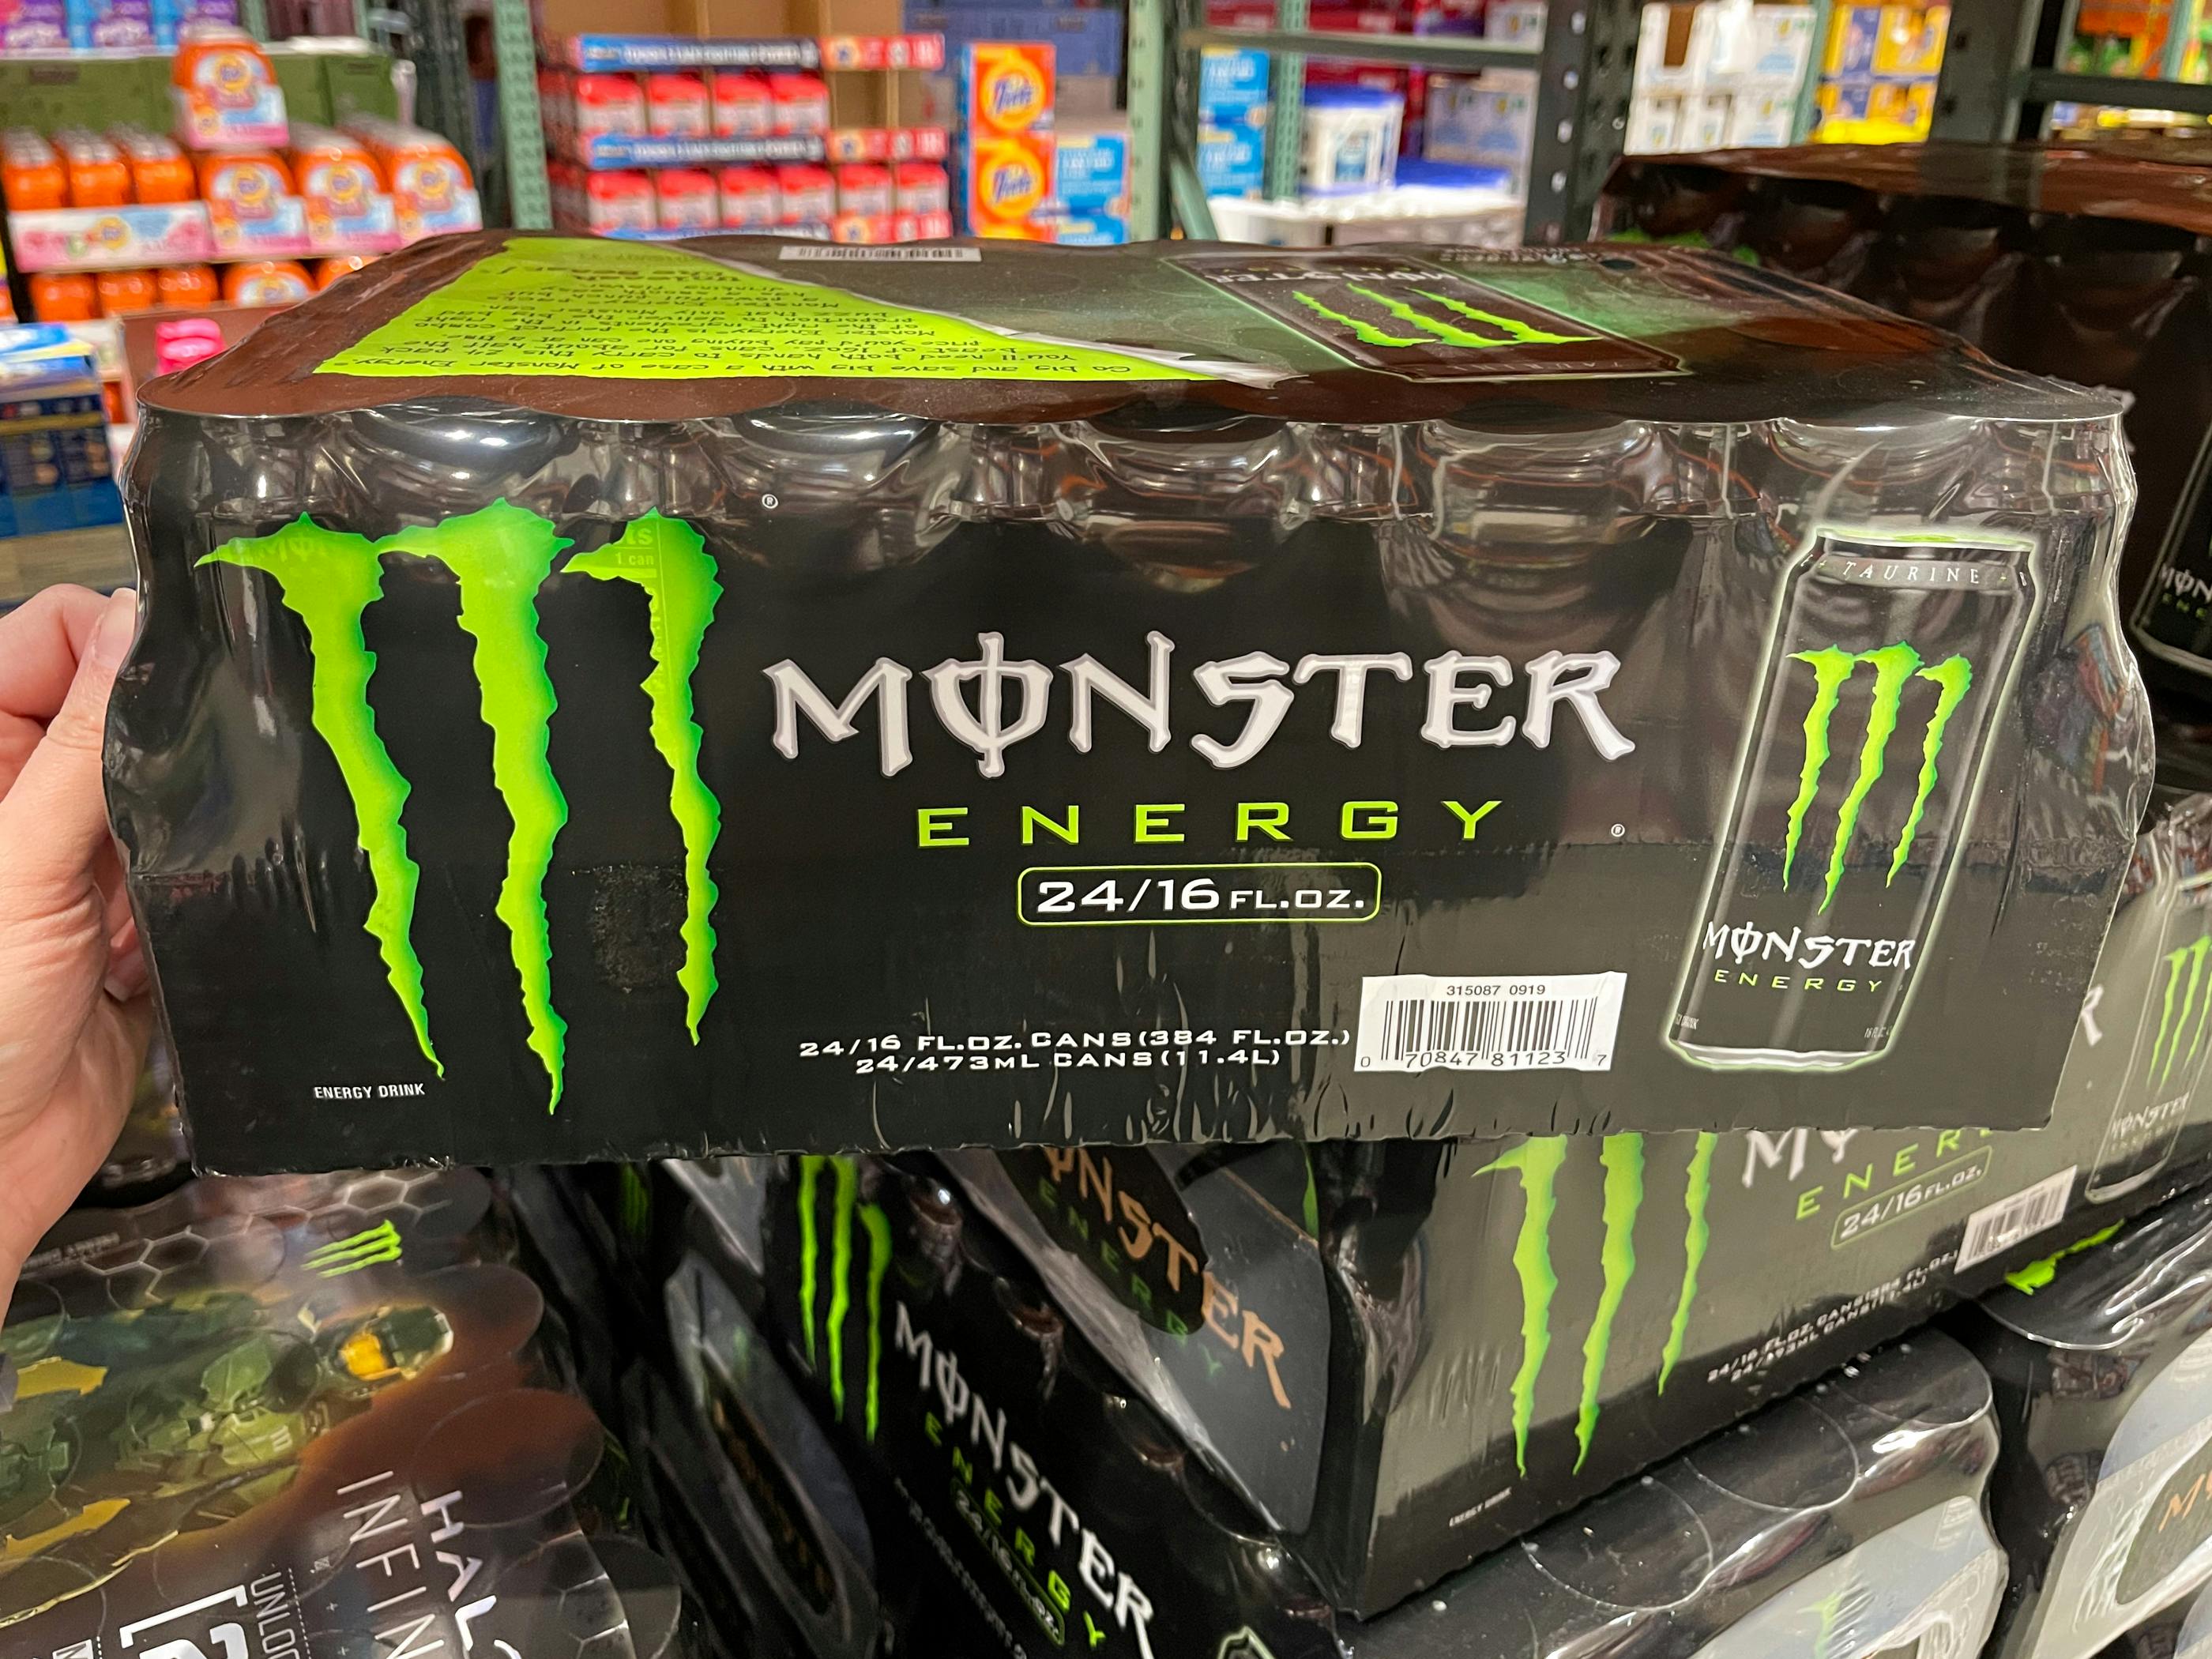 Monster energy drink at Costco